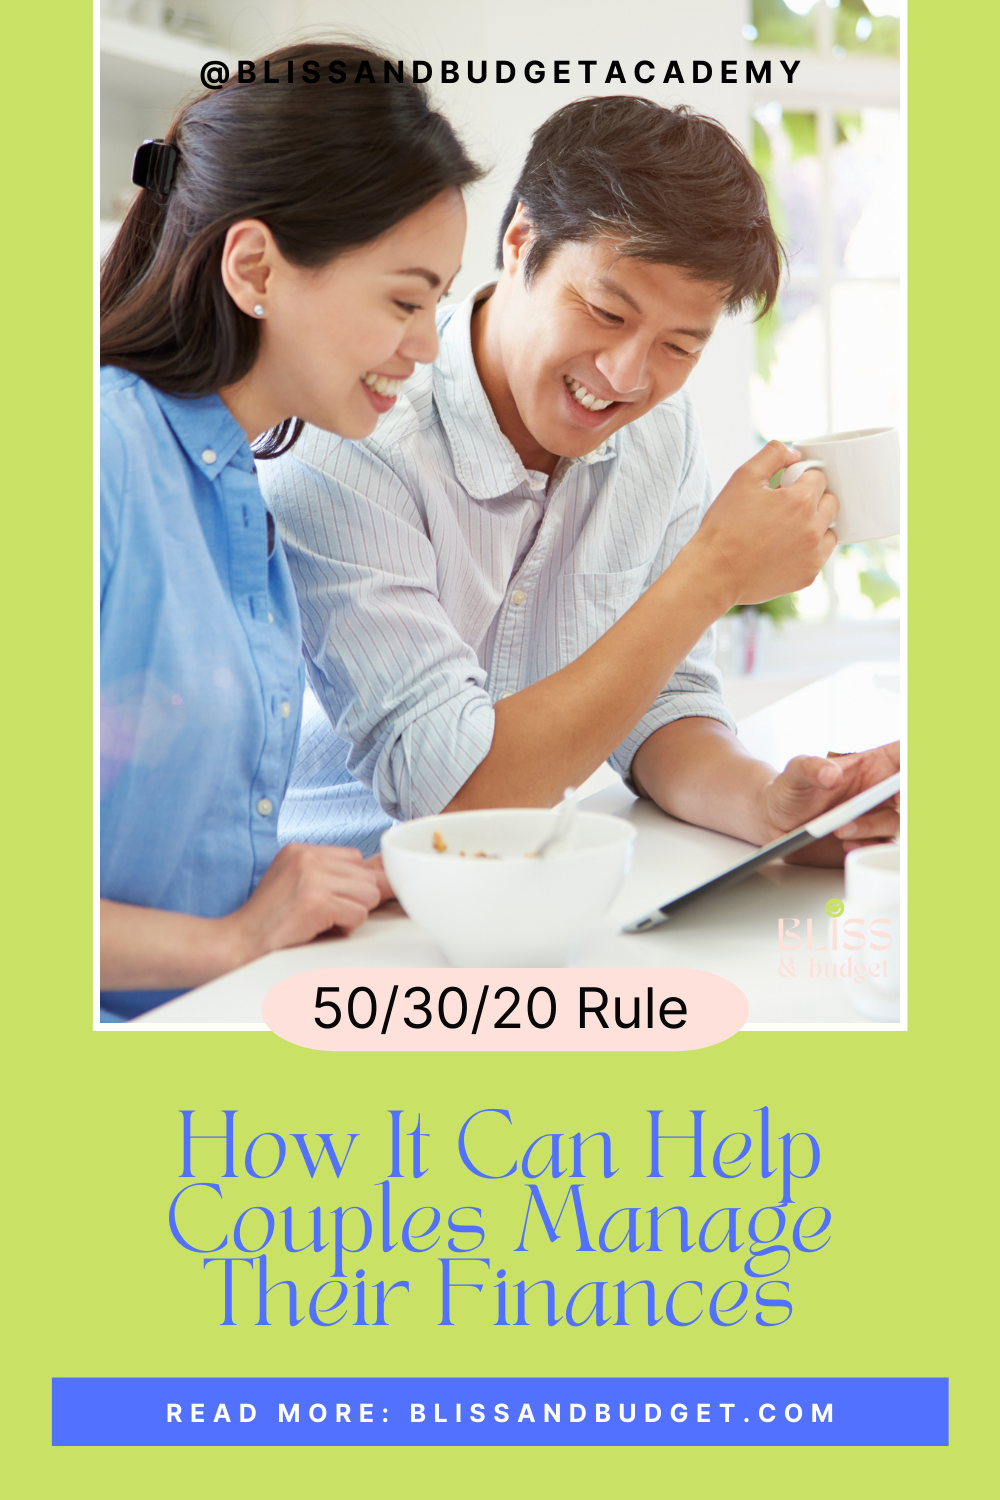 How the 50/30/20 Rule Can Help Couples Manage Their Finances